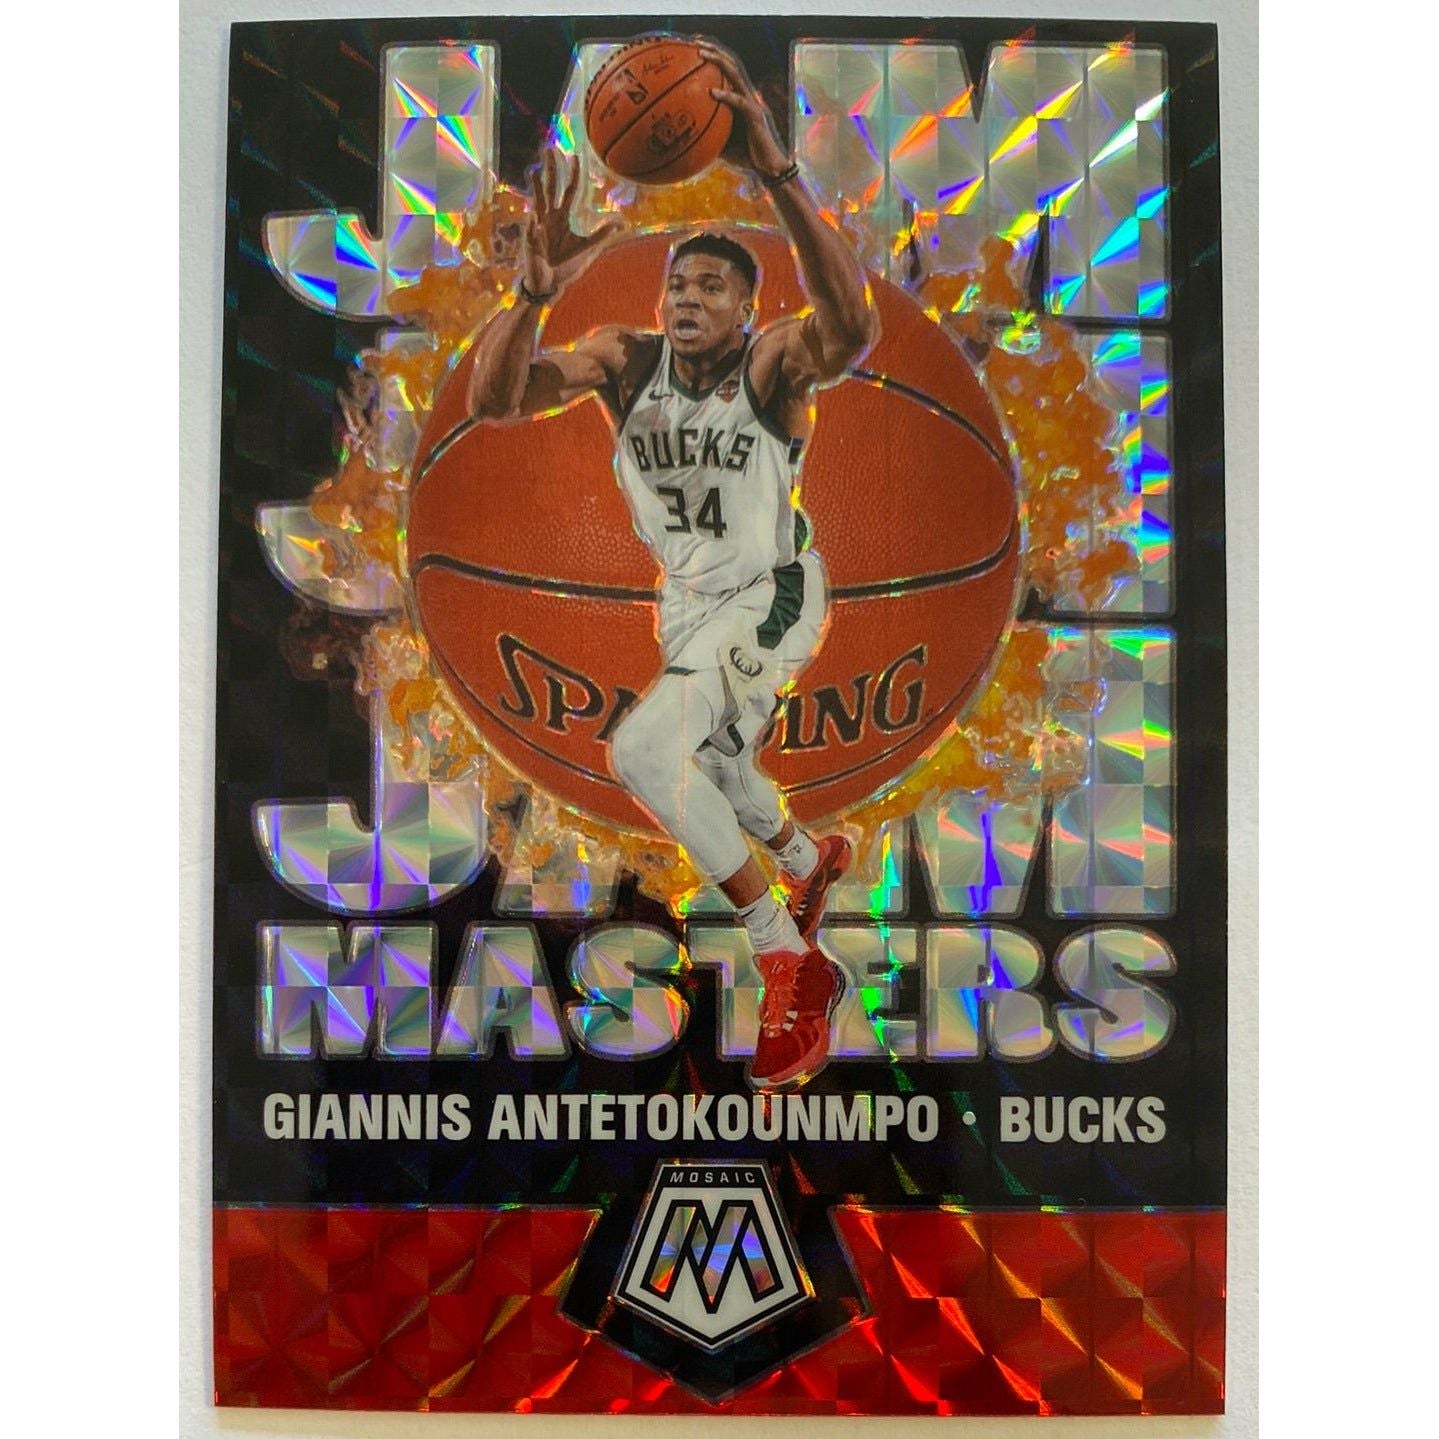  2019-20 Mosaic Giannis Antetokounmpo Jam Masters Prizm  Local Legends Cards & Collectibles